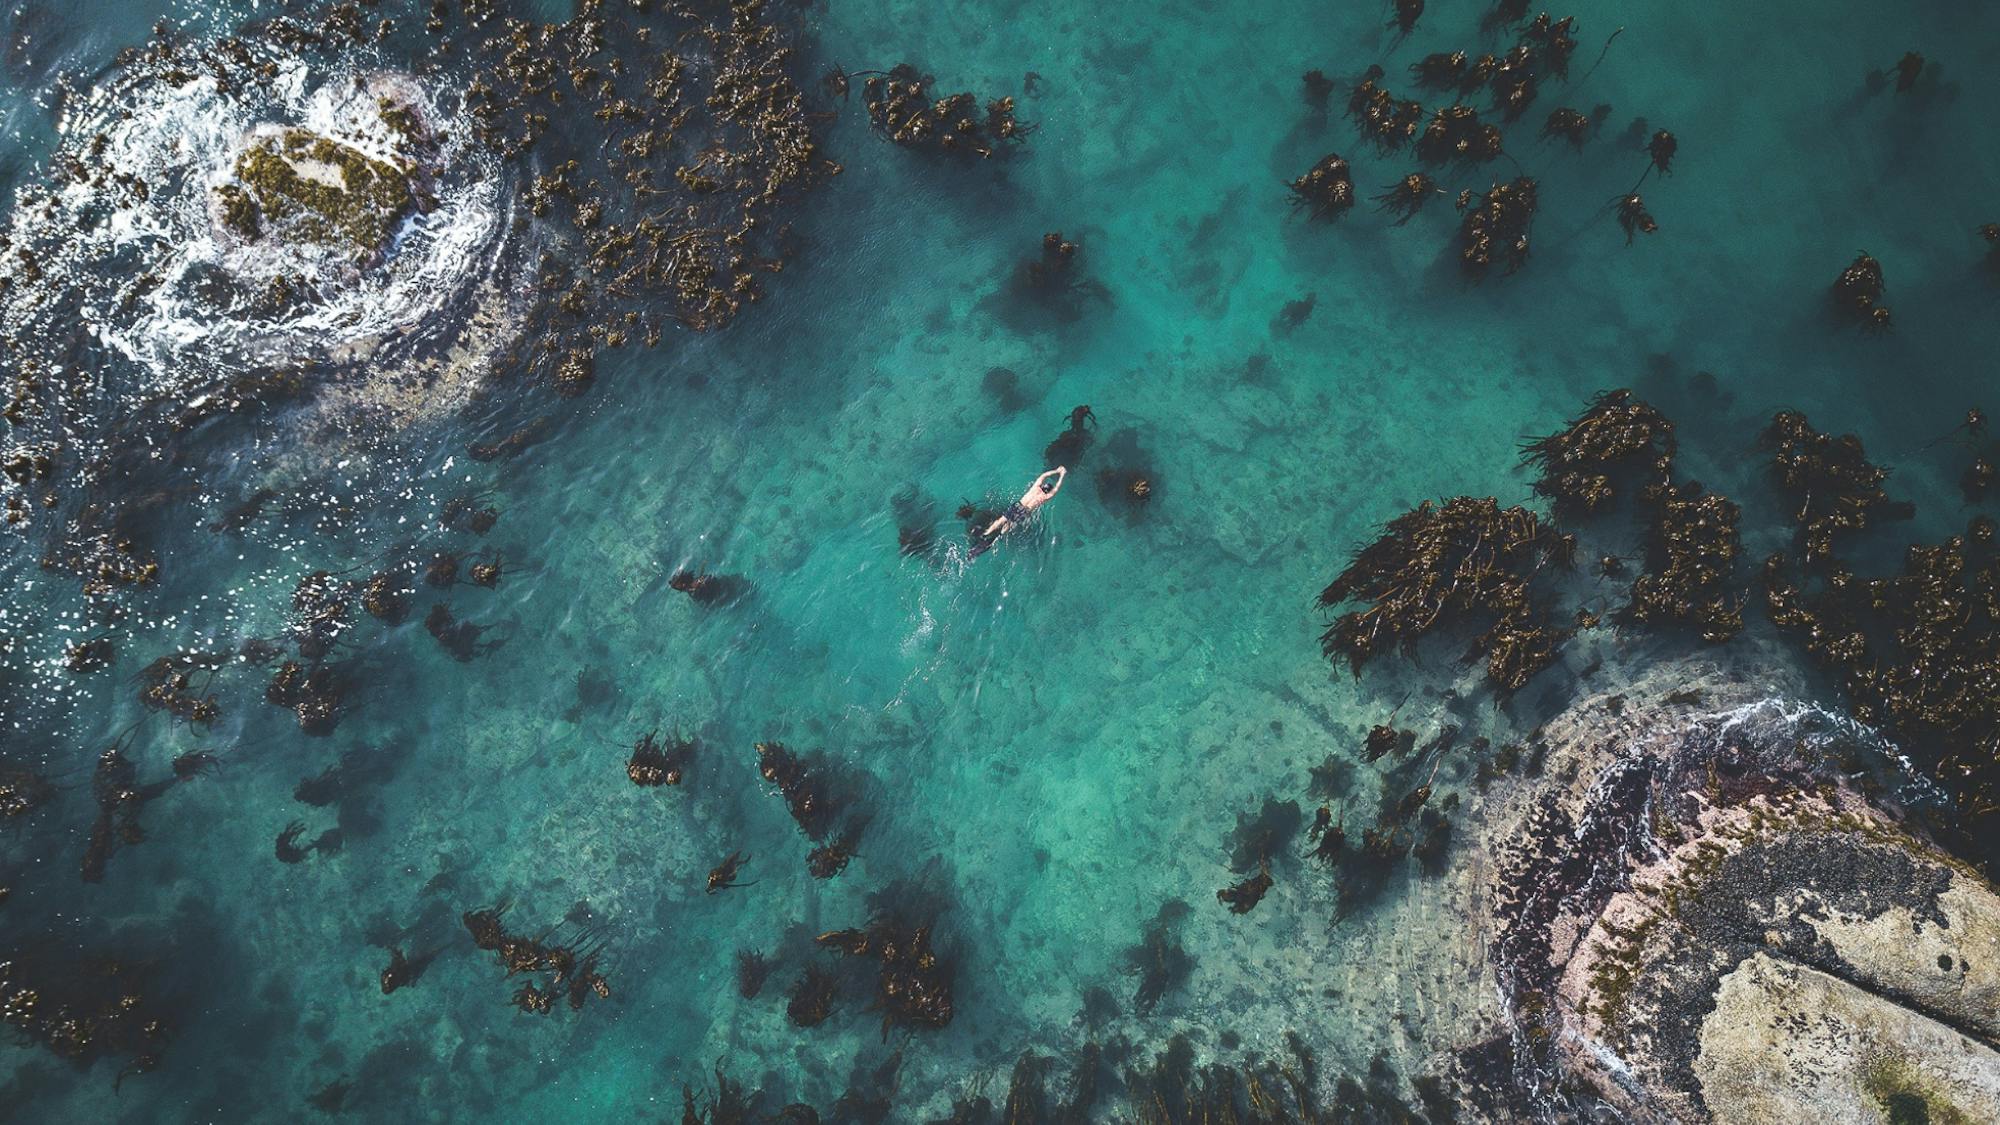 An aerial shot of Craig Foster swimming in the kelp forest. The blue-green water swirls around outcroppings of rock and the kelp seems to rise up like trees.